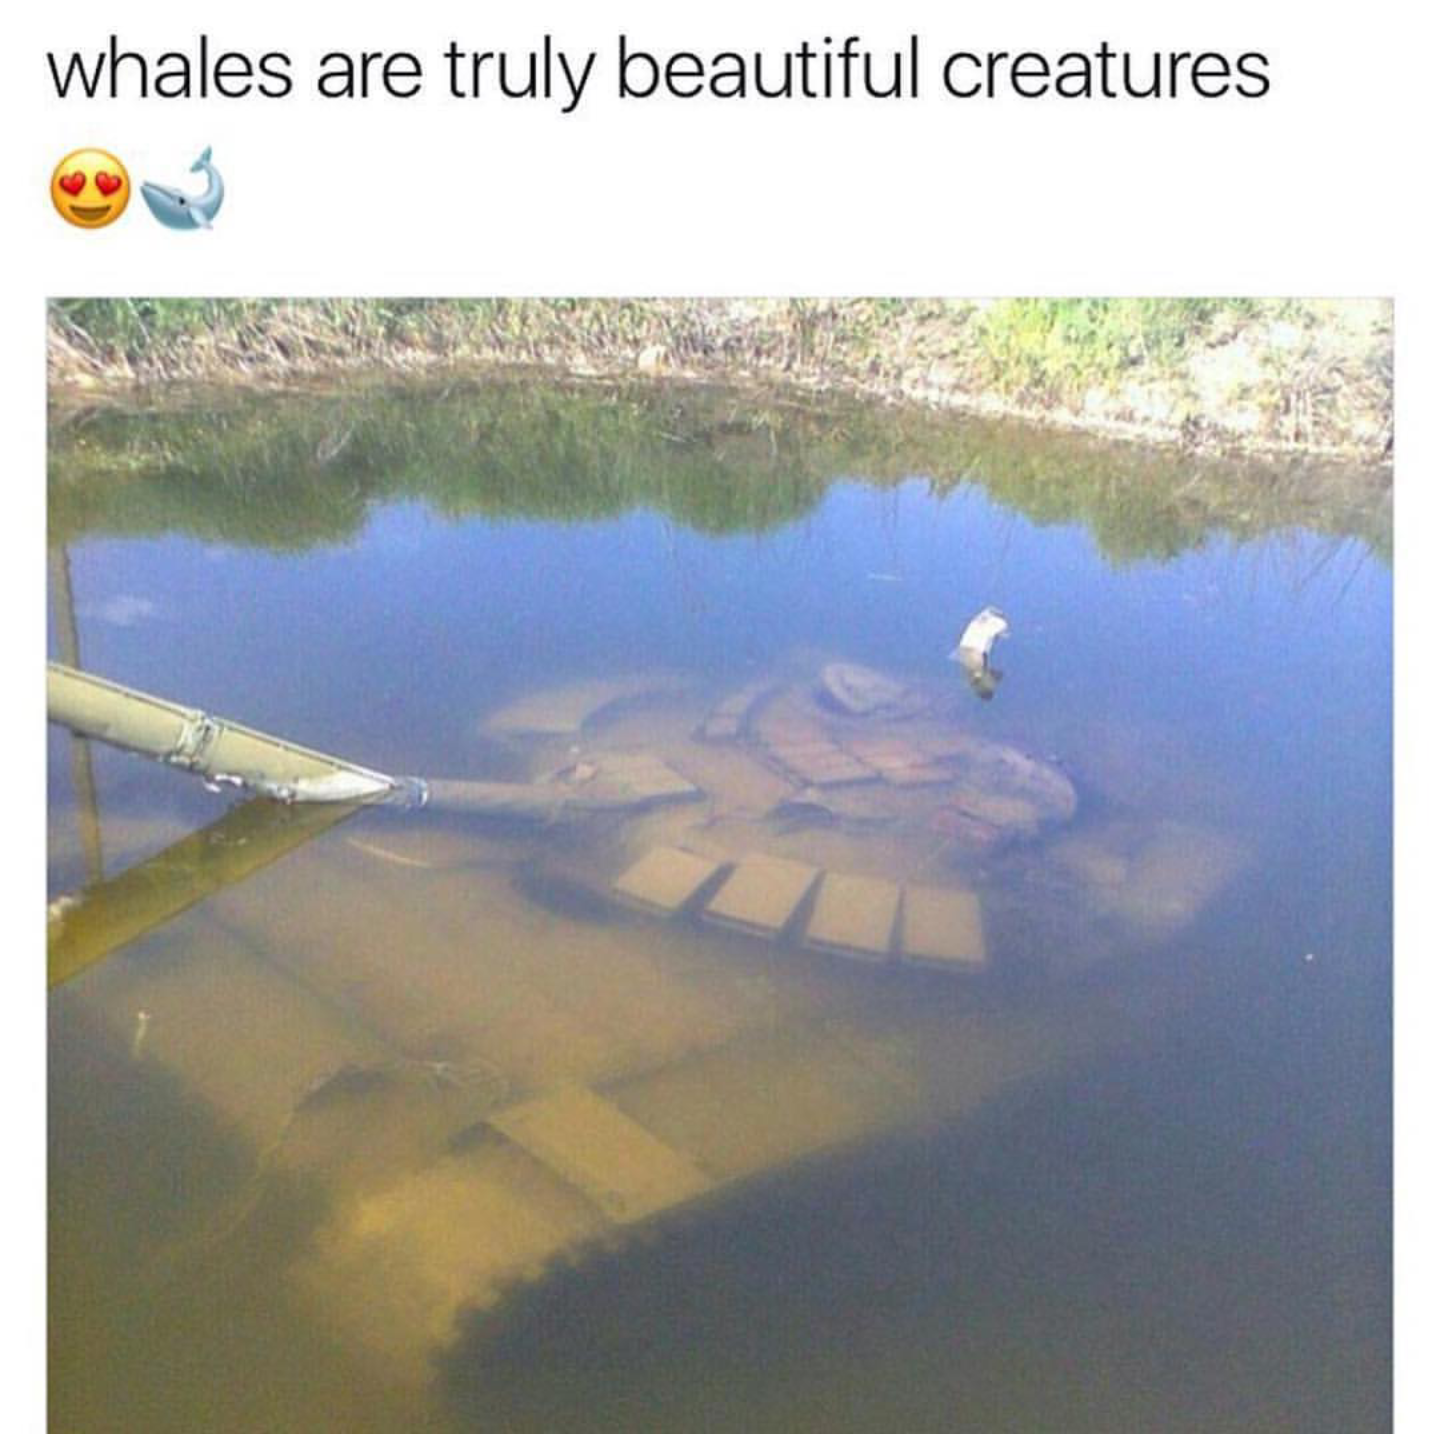 women are such majestic creatures meme - whales are truly beautiful creatures